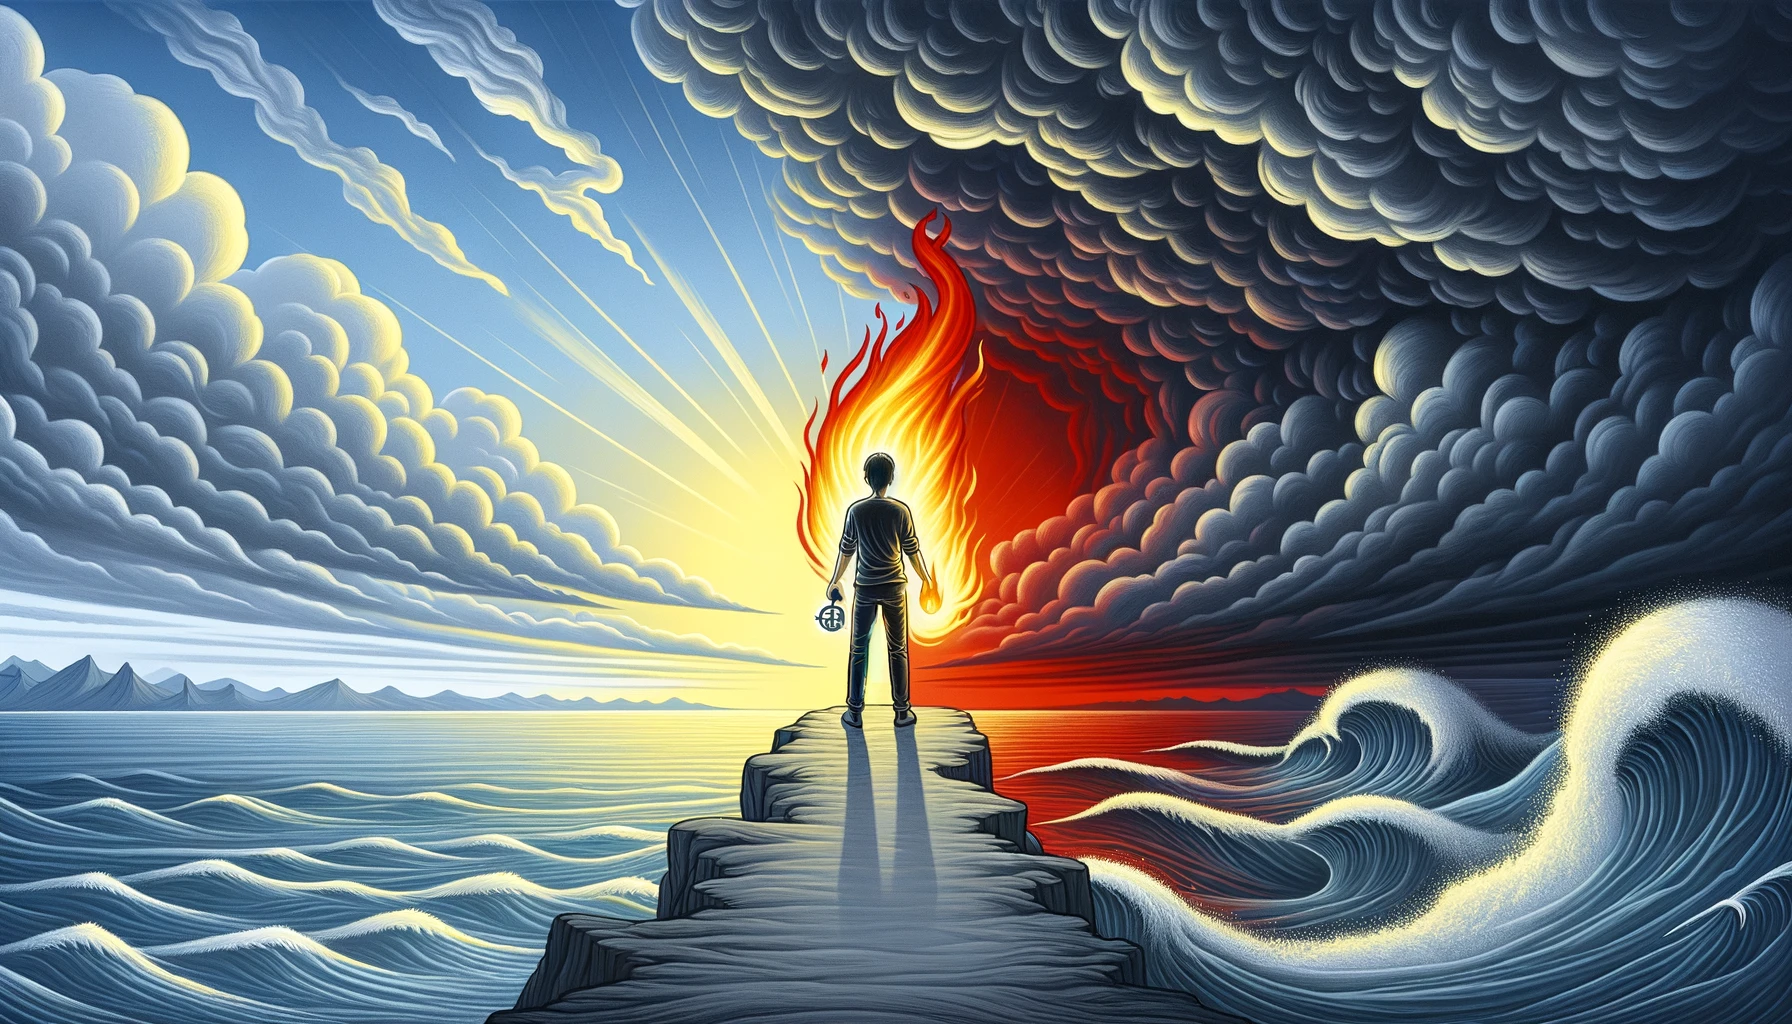 A person stands at the tumultuous sea's edge under a stormy sky, symbolizing anger. They hold a compass for guidance and a bright red flame for energy. The sea and sky calm towards the horizon, transitioning to a serene landscape with a clear path forward. The palette includes Light Gray for the sky, Dark Gray for the sea, Bright Red for the flame, Yellow for the landscape, and Blue for the calm sea, embodying the transformation of anger into positive action through Stoic philosophy and nonviolent communication.